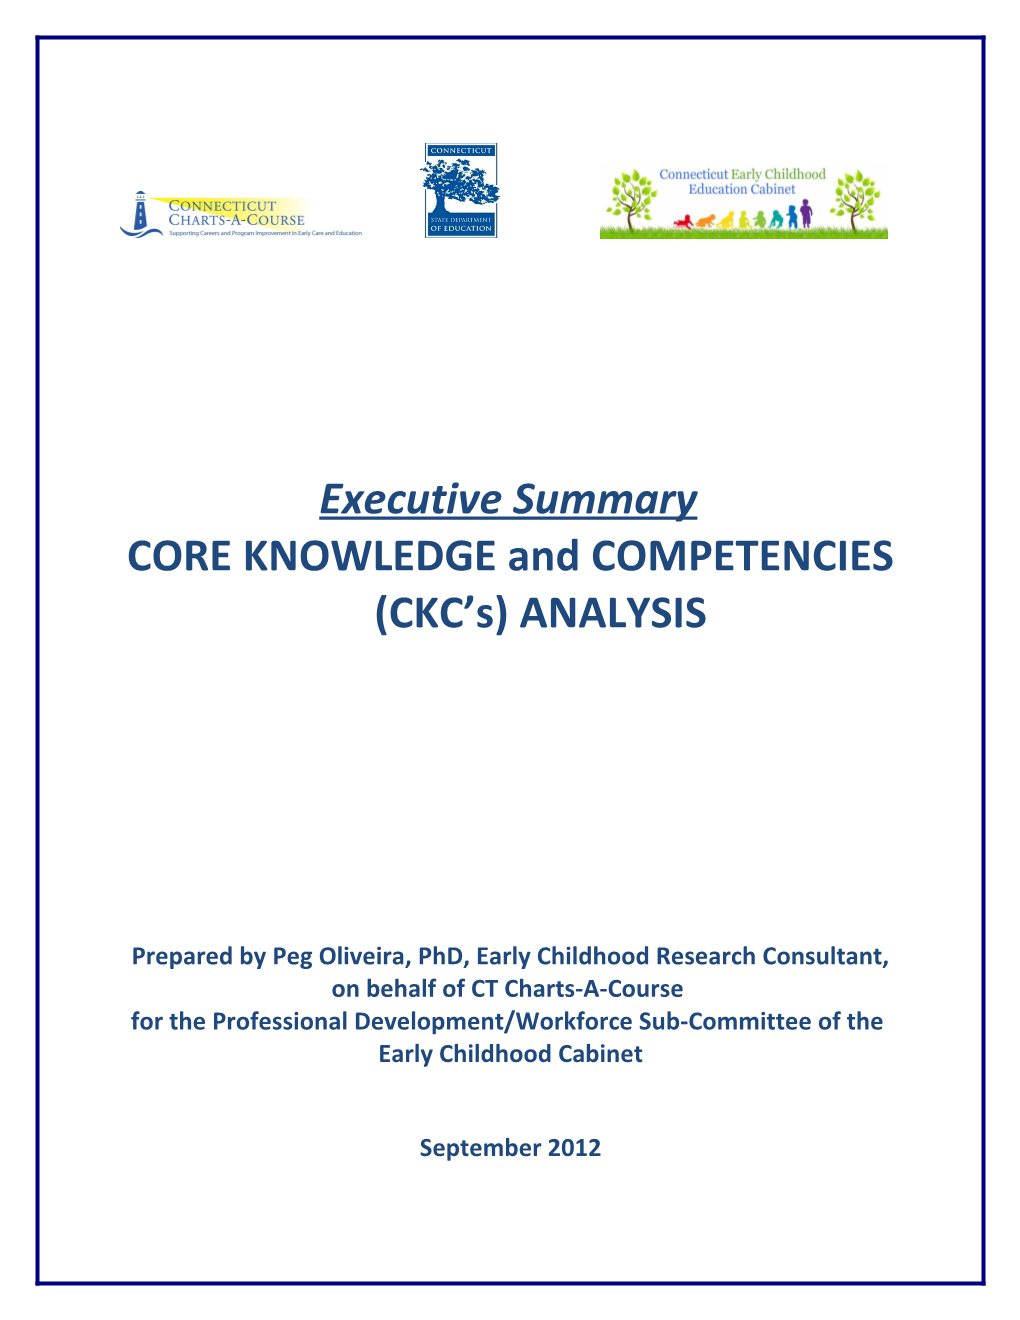 CORE KNOWLEDGE and COMPETENCIES (CKC S) ANALYSIS